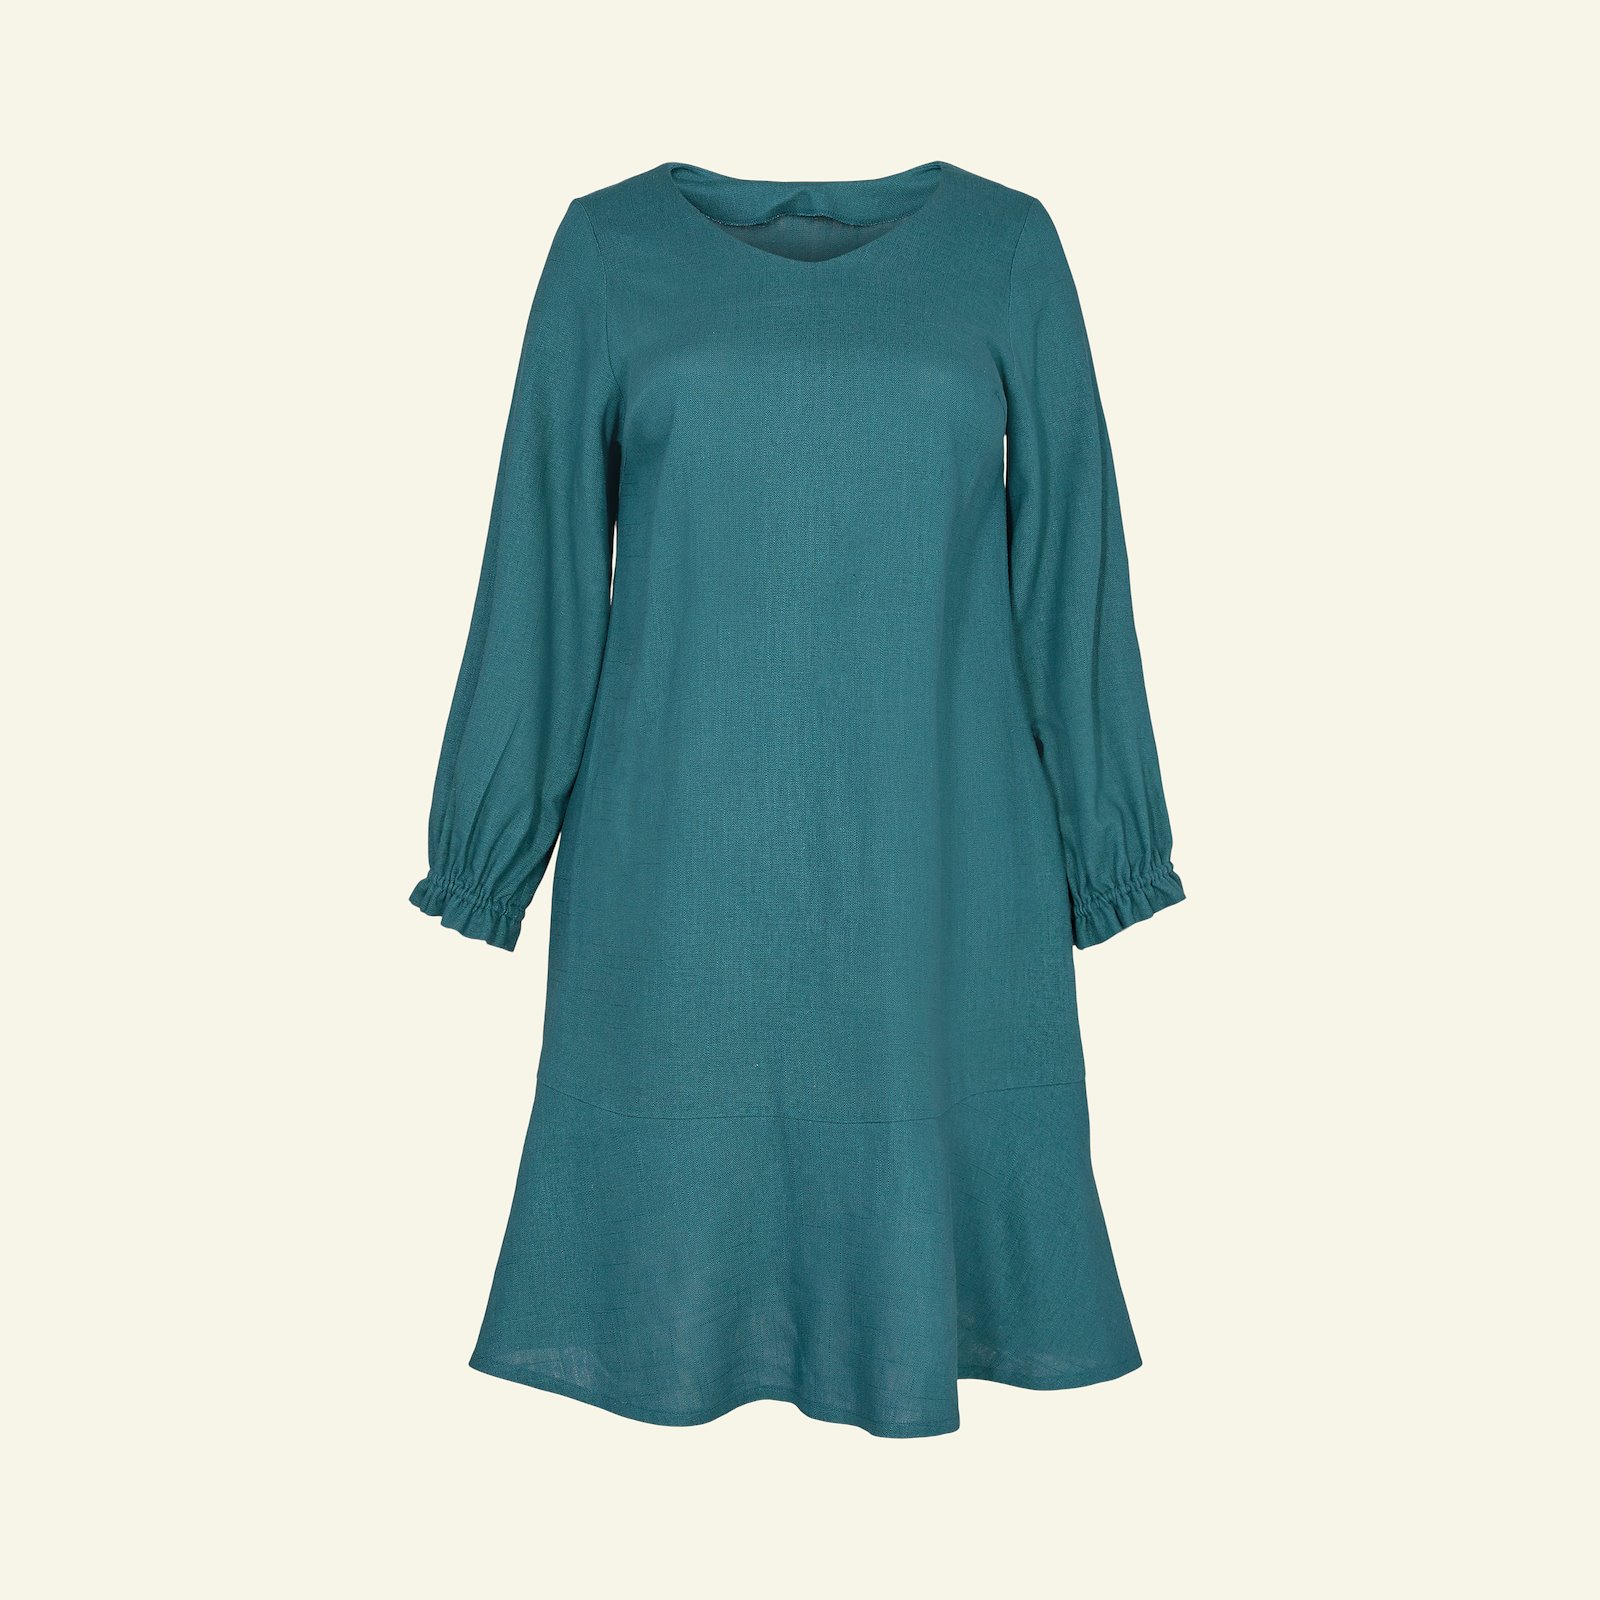 Dress with long and short sleeves, 58/30 p73018_410129_sskit